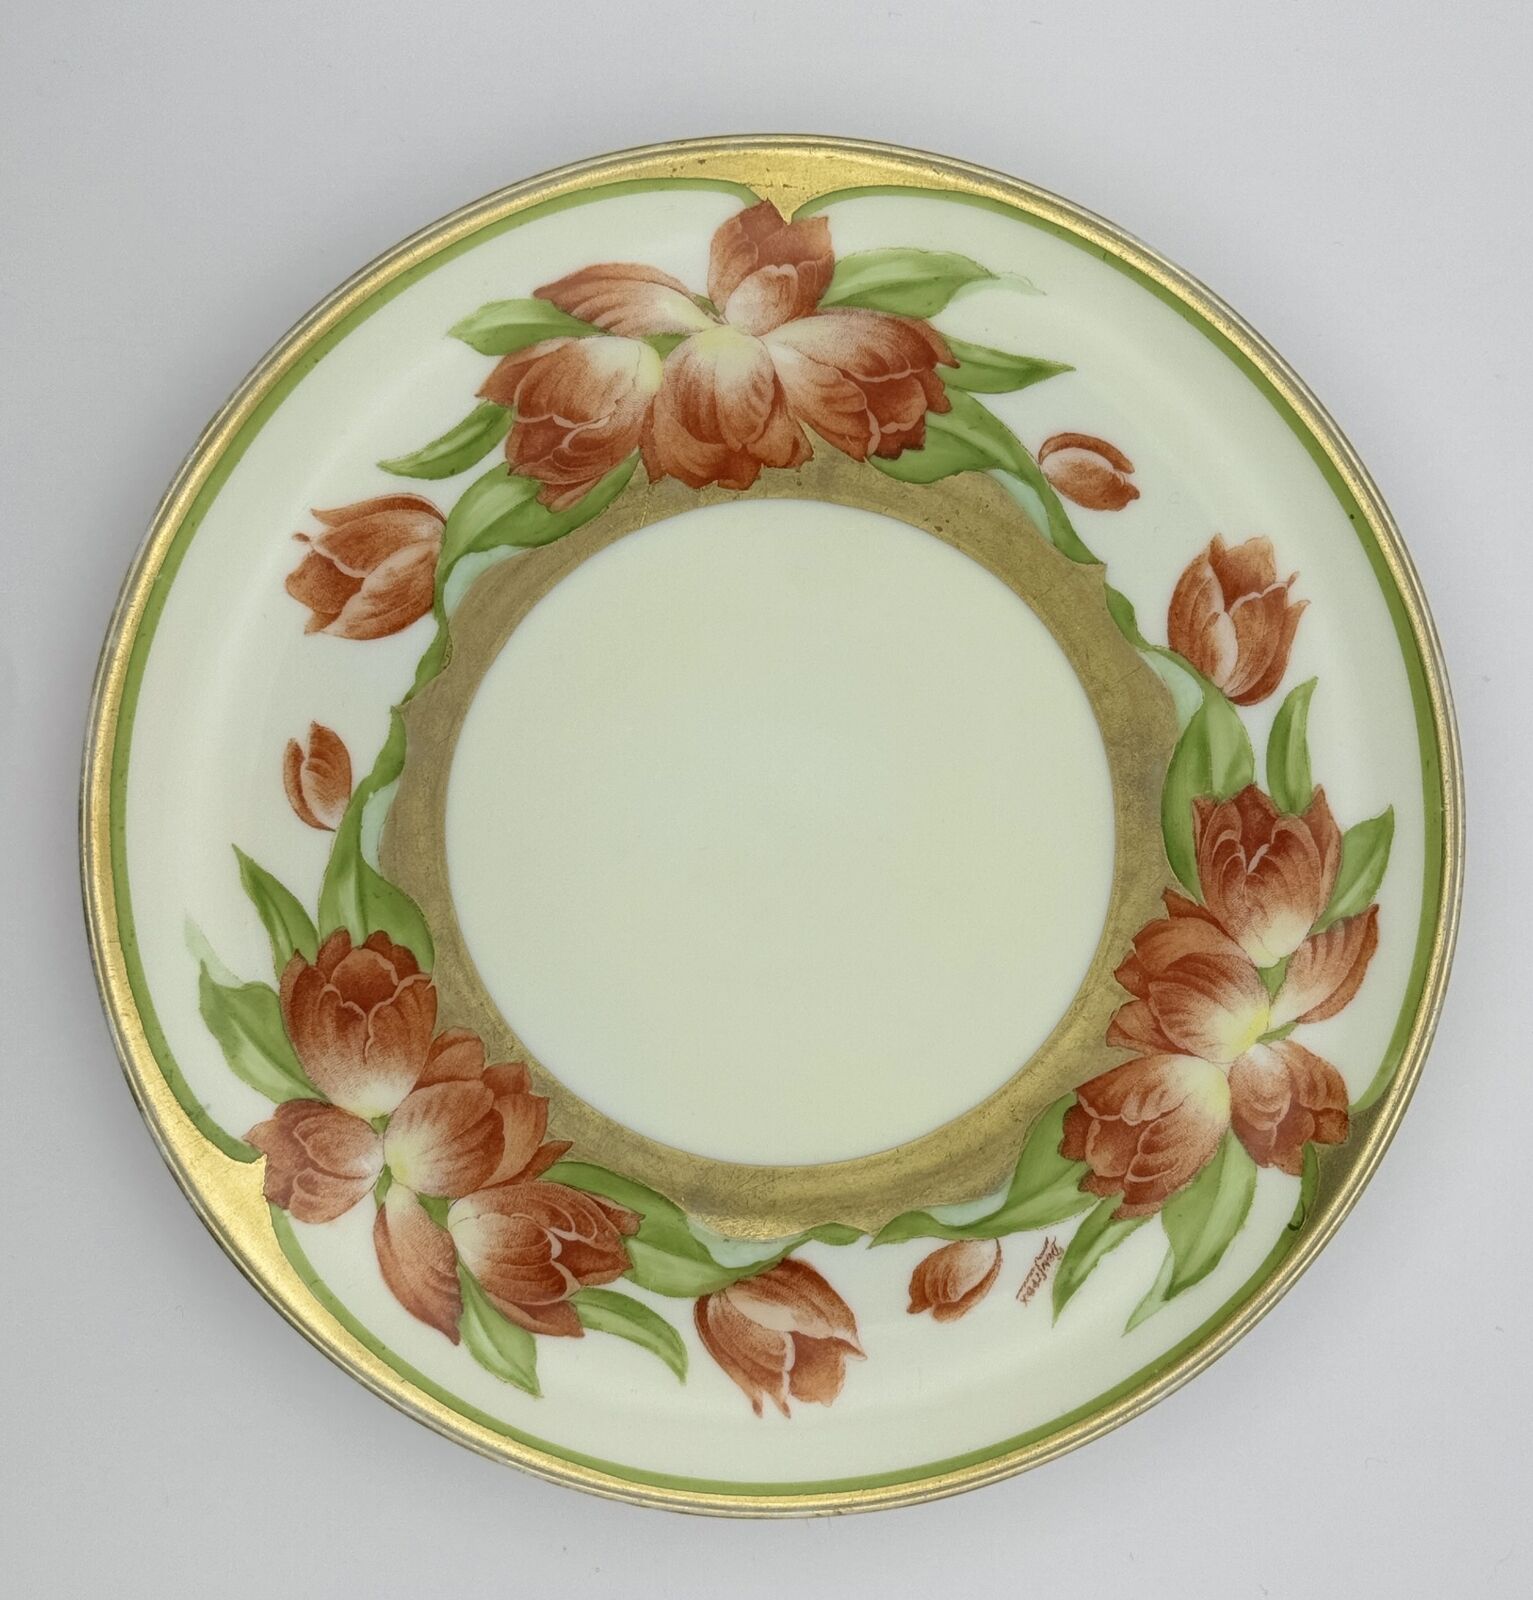 PT Bavaria Red Tulips & Gold, Hand-Painted Porcelain Plate Signed by Doufreux